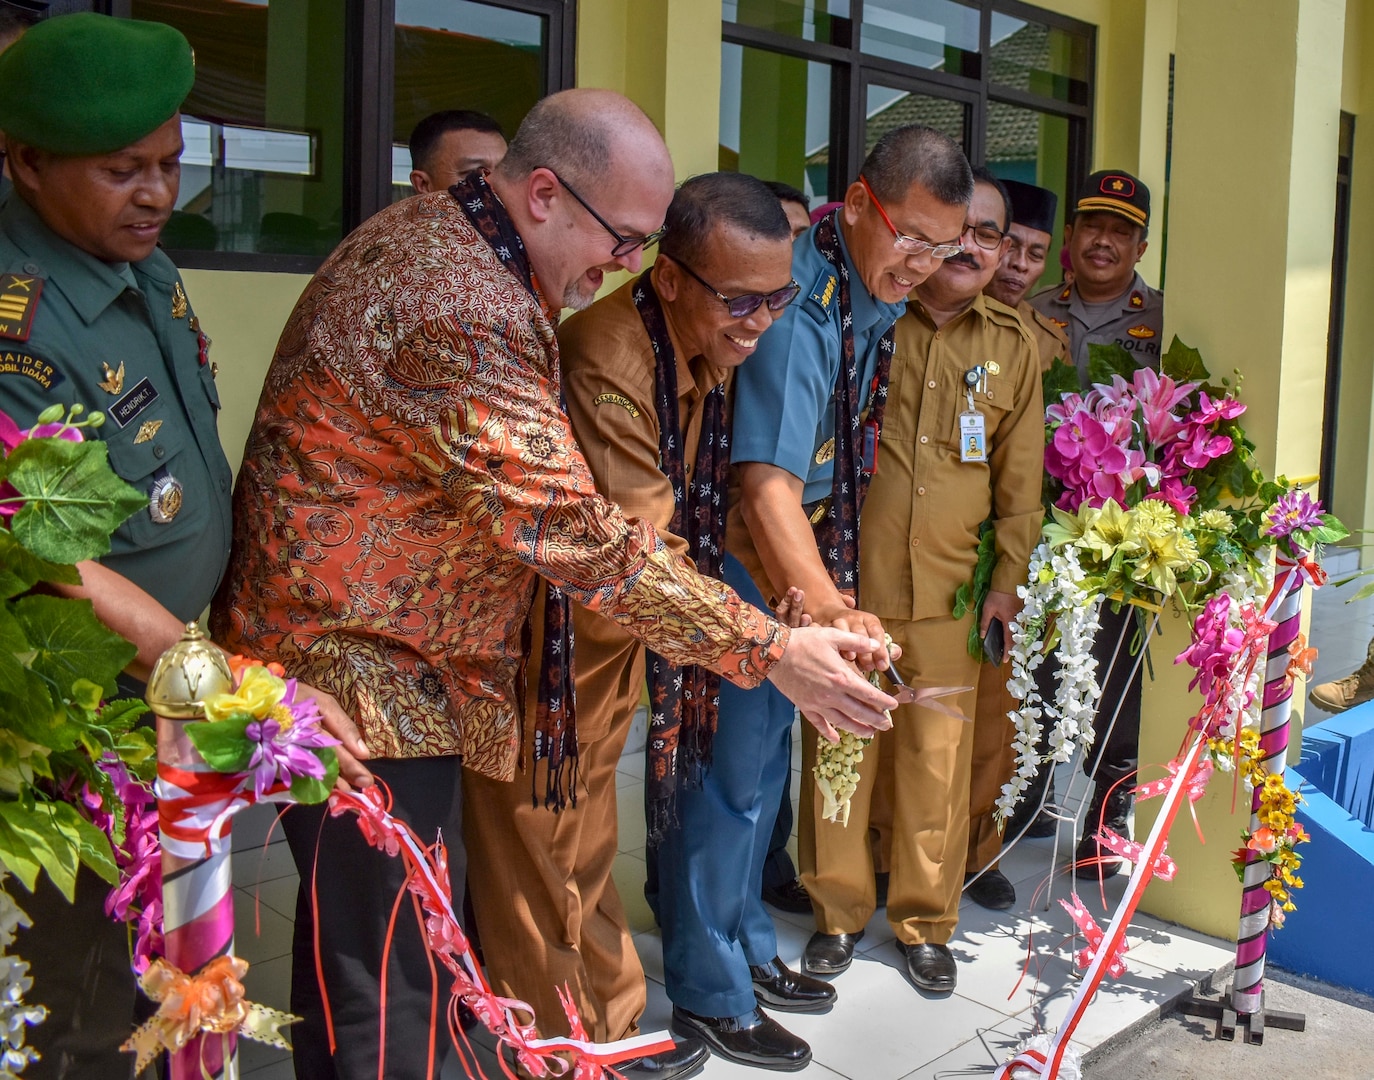 GRESIK DISTRICT, Indonesia (Aug. 5, 2019) Mark McGovern, U.S. Consul General in Surabaya, Indonesia, Dr. Sambari Halim Radianto, head of Gresik District Government, and Indonesian Navy Kolonel Laut Eka Prabawa, assistant for maritime potential, cut a ribbon to mark the completion of a construction project at the SDN Duduk Sampeyan Elementary School during Cooperation Afloat Readiness and Training (CARAT) Indonesia 2019. During the project, U.S. Navy Seabees assigned to Naval Mobile Construction Battalion 4 and Indonesian Marines assigned to the 2nd Engineering Battalion built a two-room classroom wired to support 20 computers. This year marks the 25th iteration of CARAT, a multinational exercise designed to enhance U.S. and partner navies' abilities to operate together in response to traditional and non-traditional maritime security challenges in the Indo-Pacific region. (U.S. Navy photo by Steelworker 2nd Class Candace Lightsey)